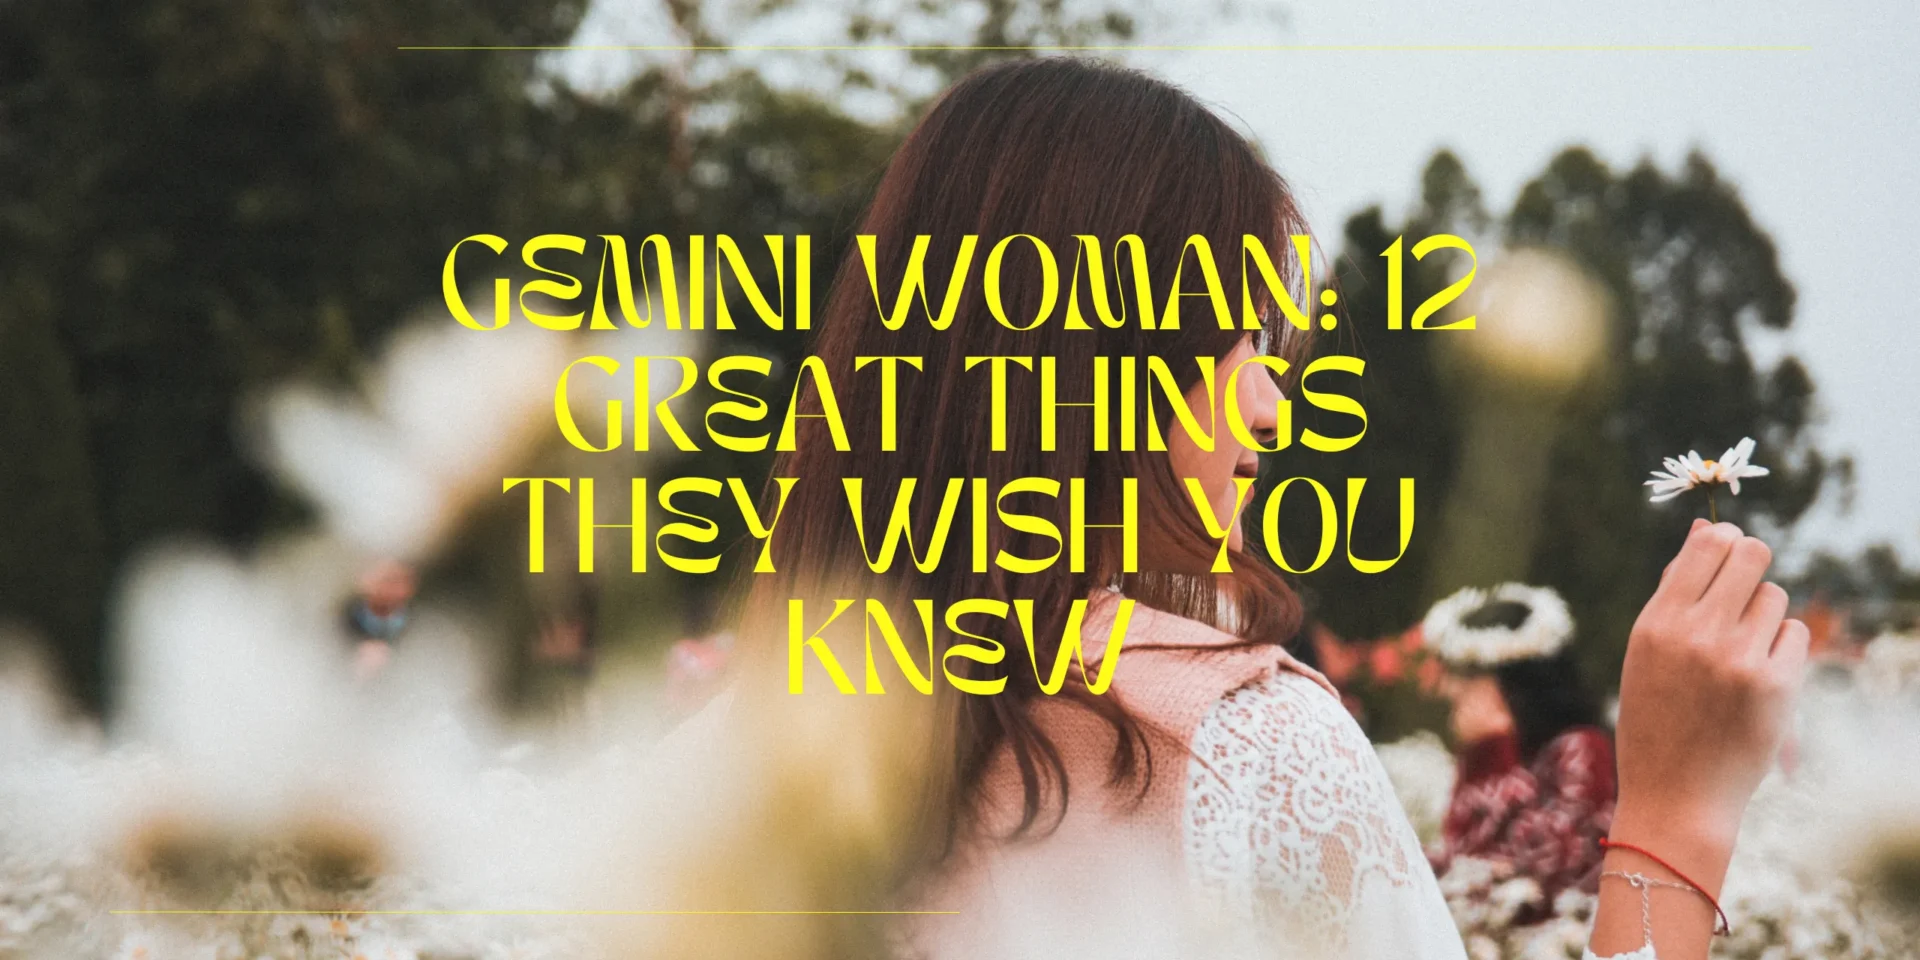 Gemini Woman: 12 Great Things They Wish You Knew